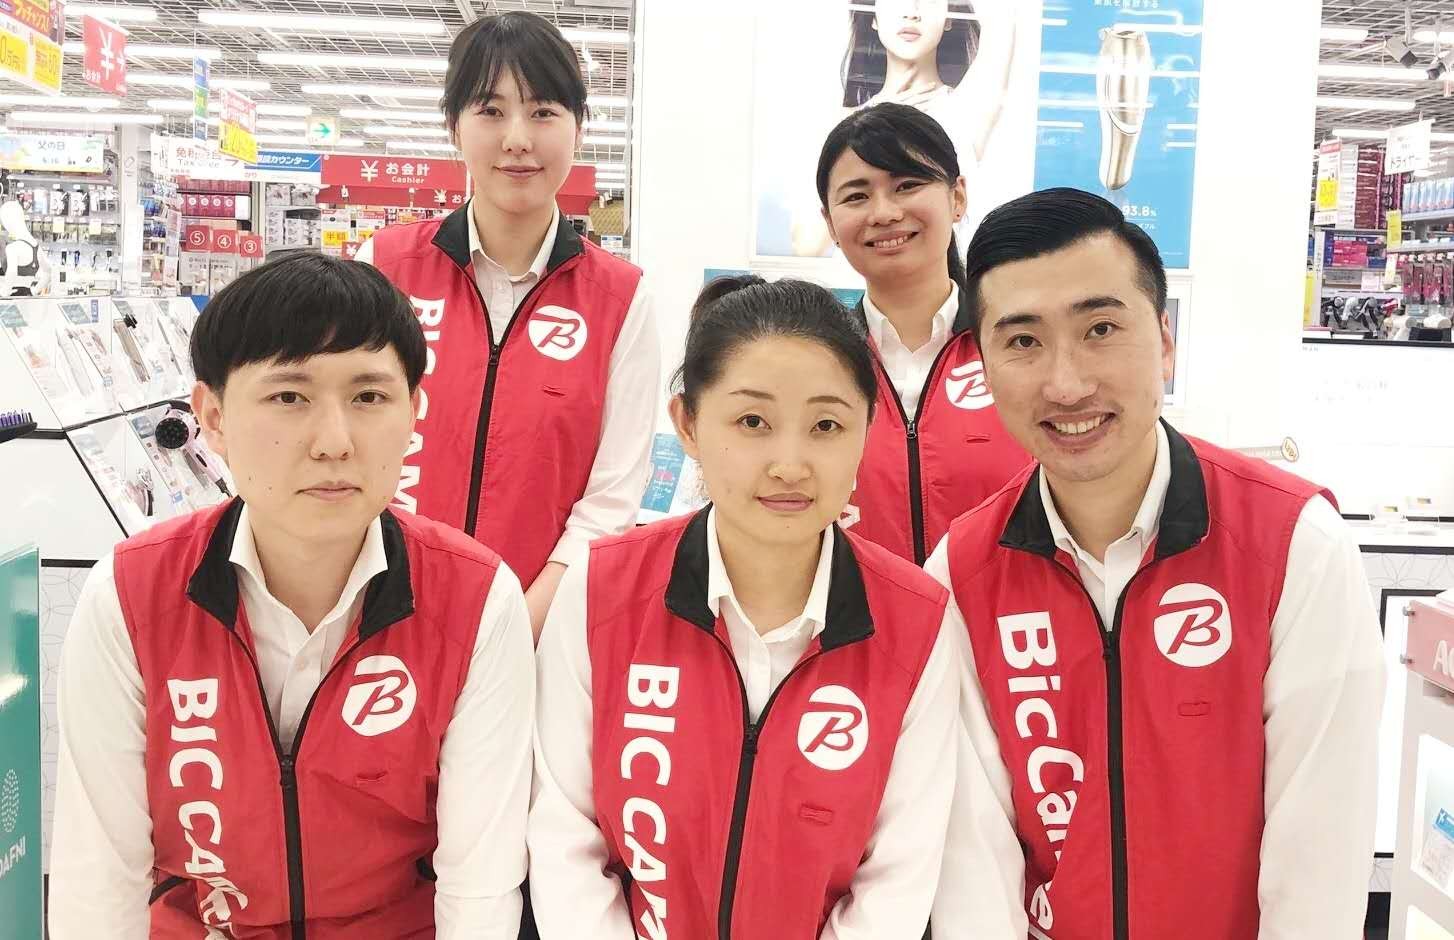 BicCamera’s friendly English and Chinese-speaking staff are here to assist you! Pick-up and delivery services make shopping a breeze for travelers!